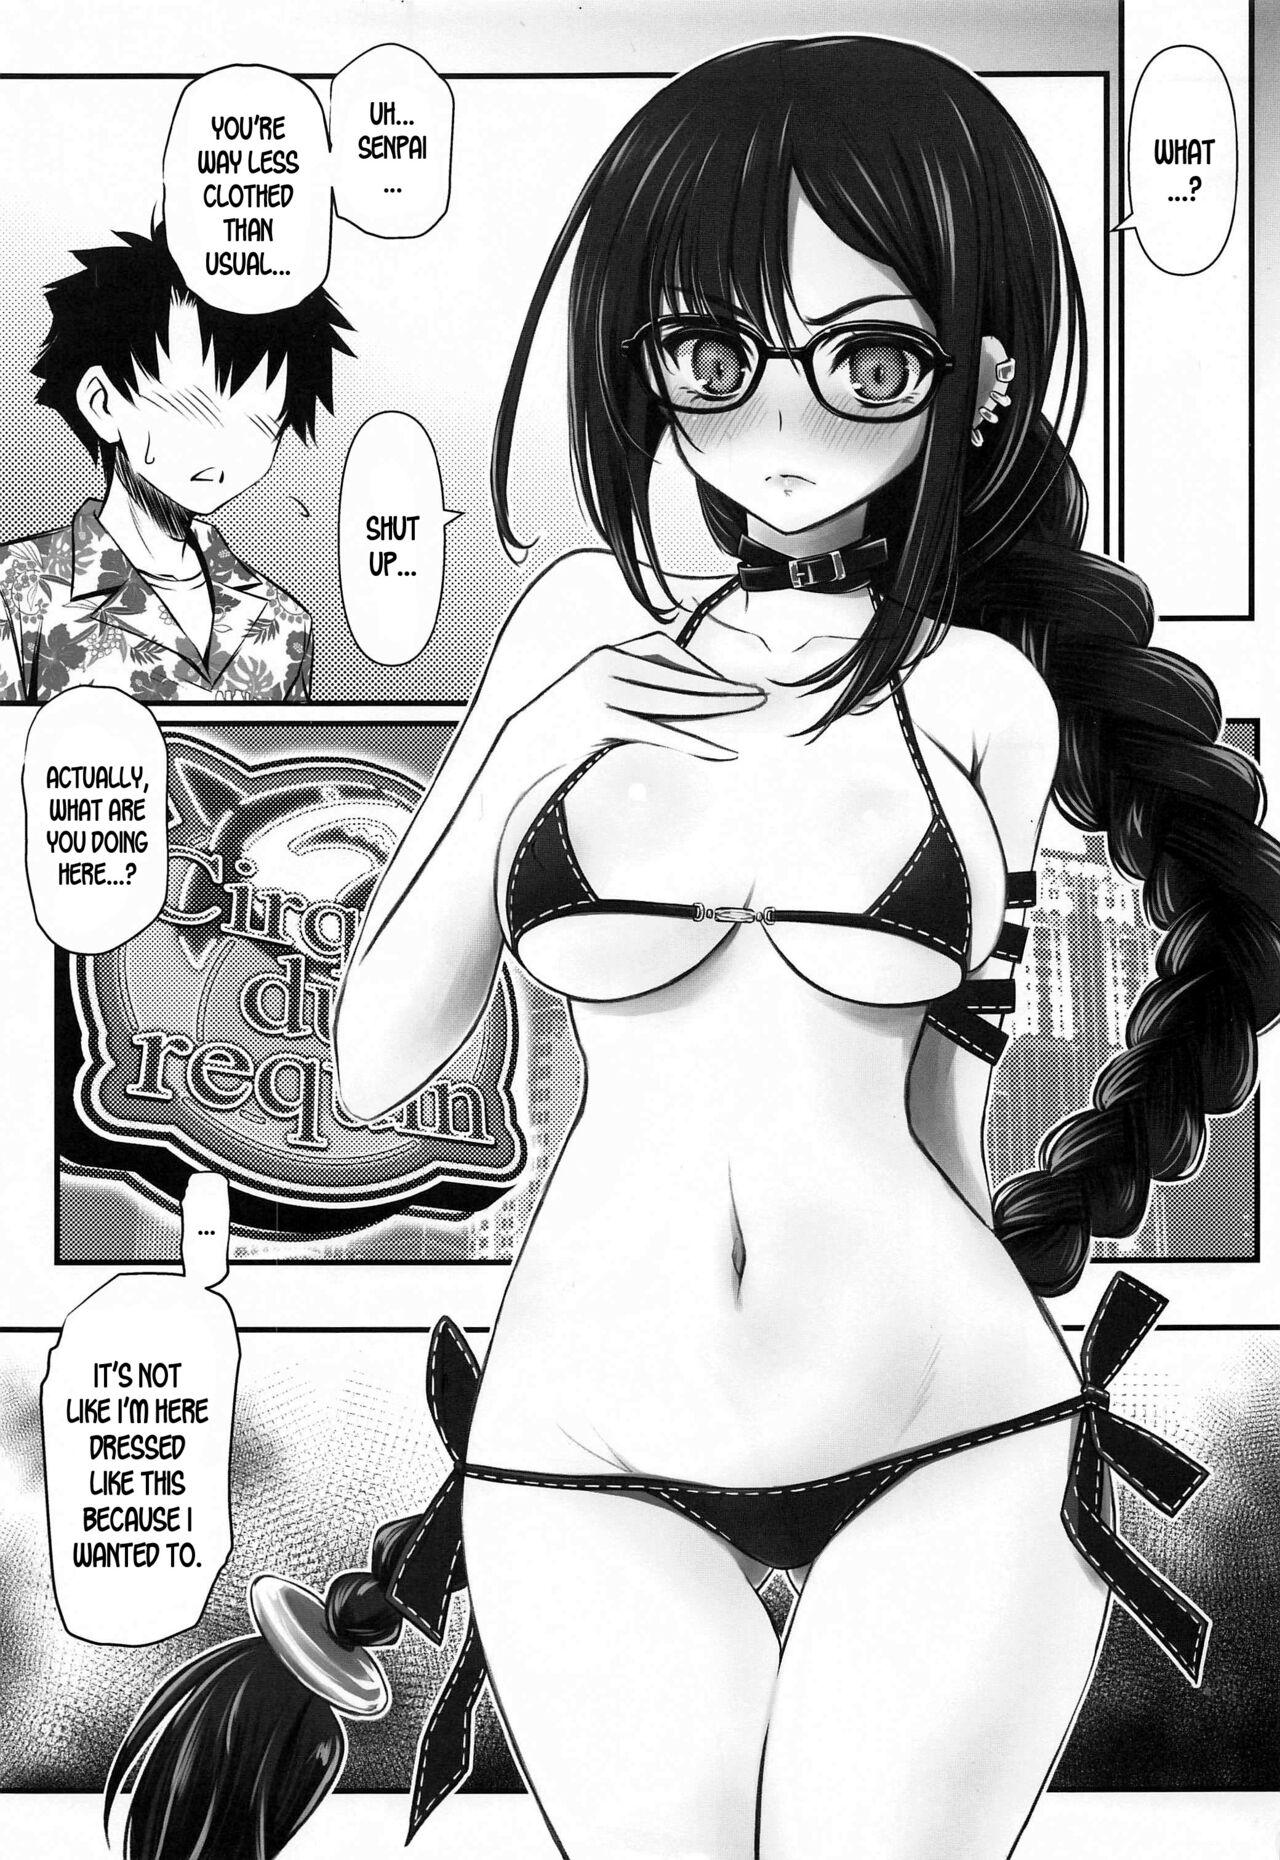 Face Sitting [Yakan Honpo (Inoue Tommy)] Megane Senpai Onee-chan - FGO Cute Glasses Sister(s) (Fate/Grand Order) [English] [desudesu] - Fate grand order Swinger - Page 2